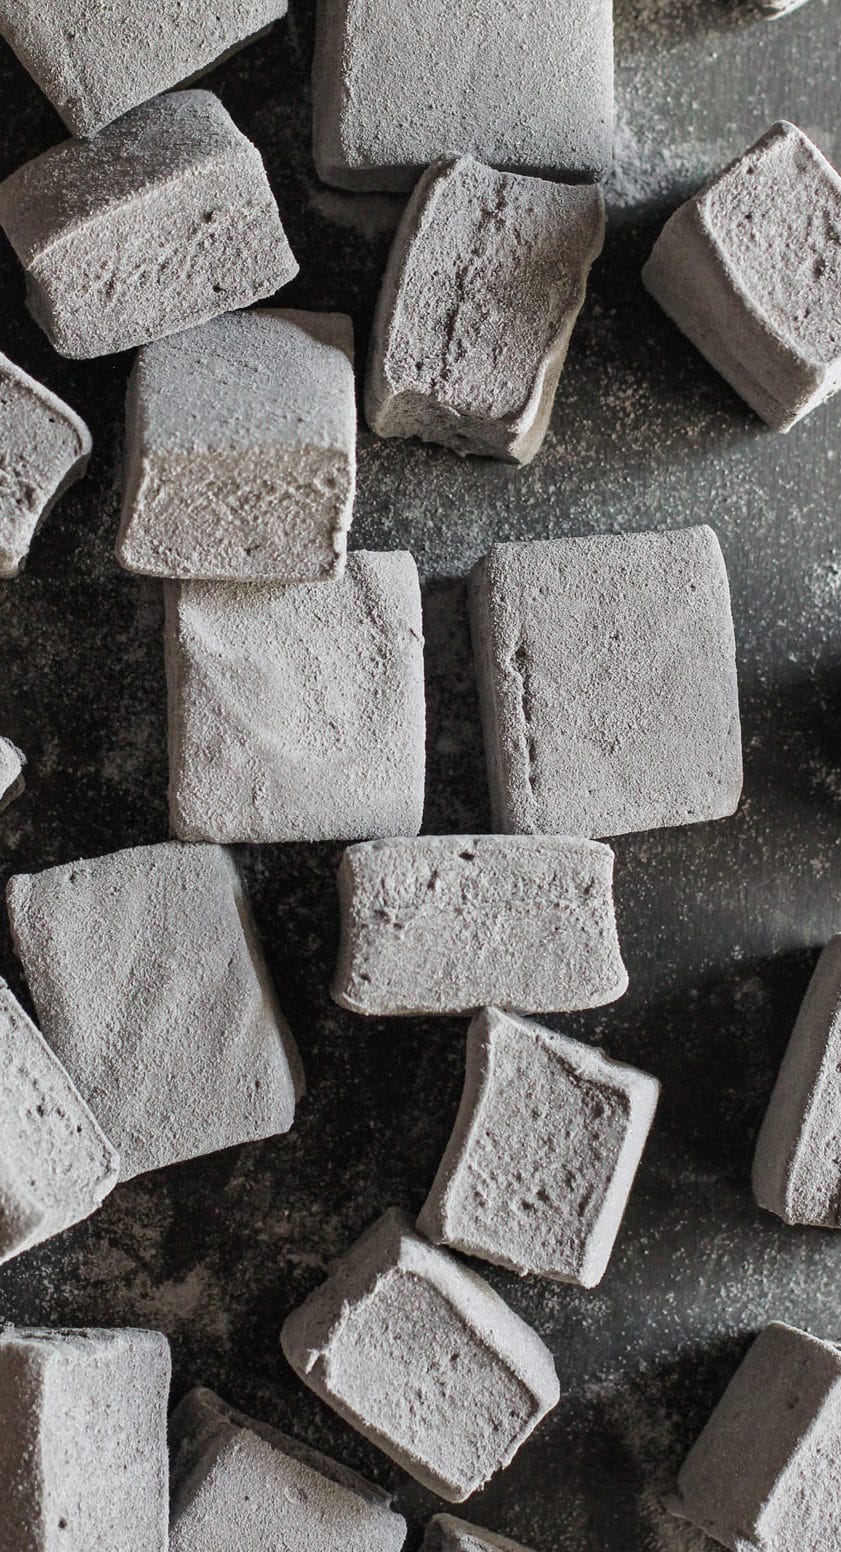 These Healthy Black Velvet Marshmallows are just as sweet and fluffy as regular marshmallows, but they're infused with chocolate and a SECRET INGREDIENT! These homemade marshmallows are naturally sweetened and naturally colored – made without corn syrup and artificial food dye. PERFECT for Halloween! (How to Make Marshmallows) Healthy Dessert Recipes at the Desserts With Benefits Blog